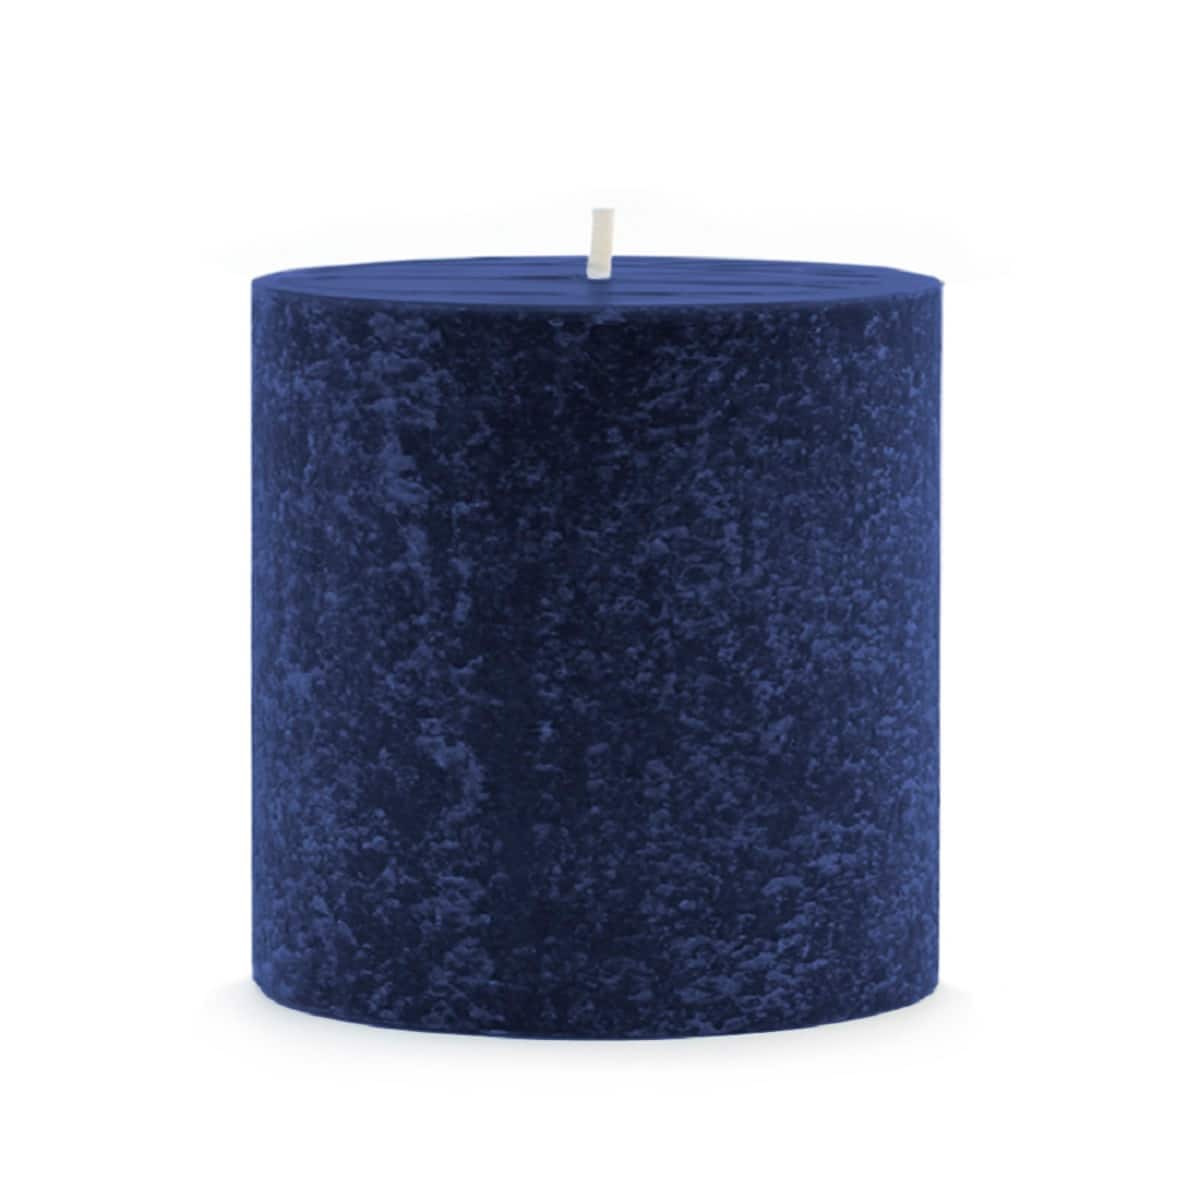 Root Candles 3" x 3" Unscented Timberline™ Pillar Candle